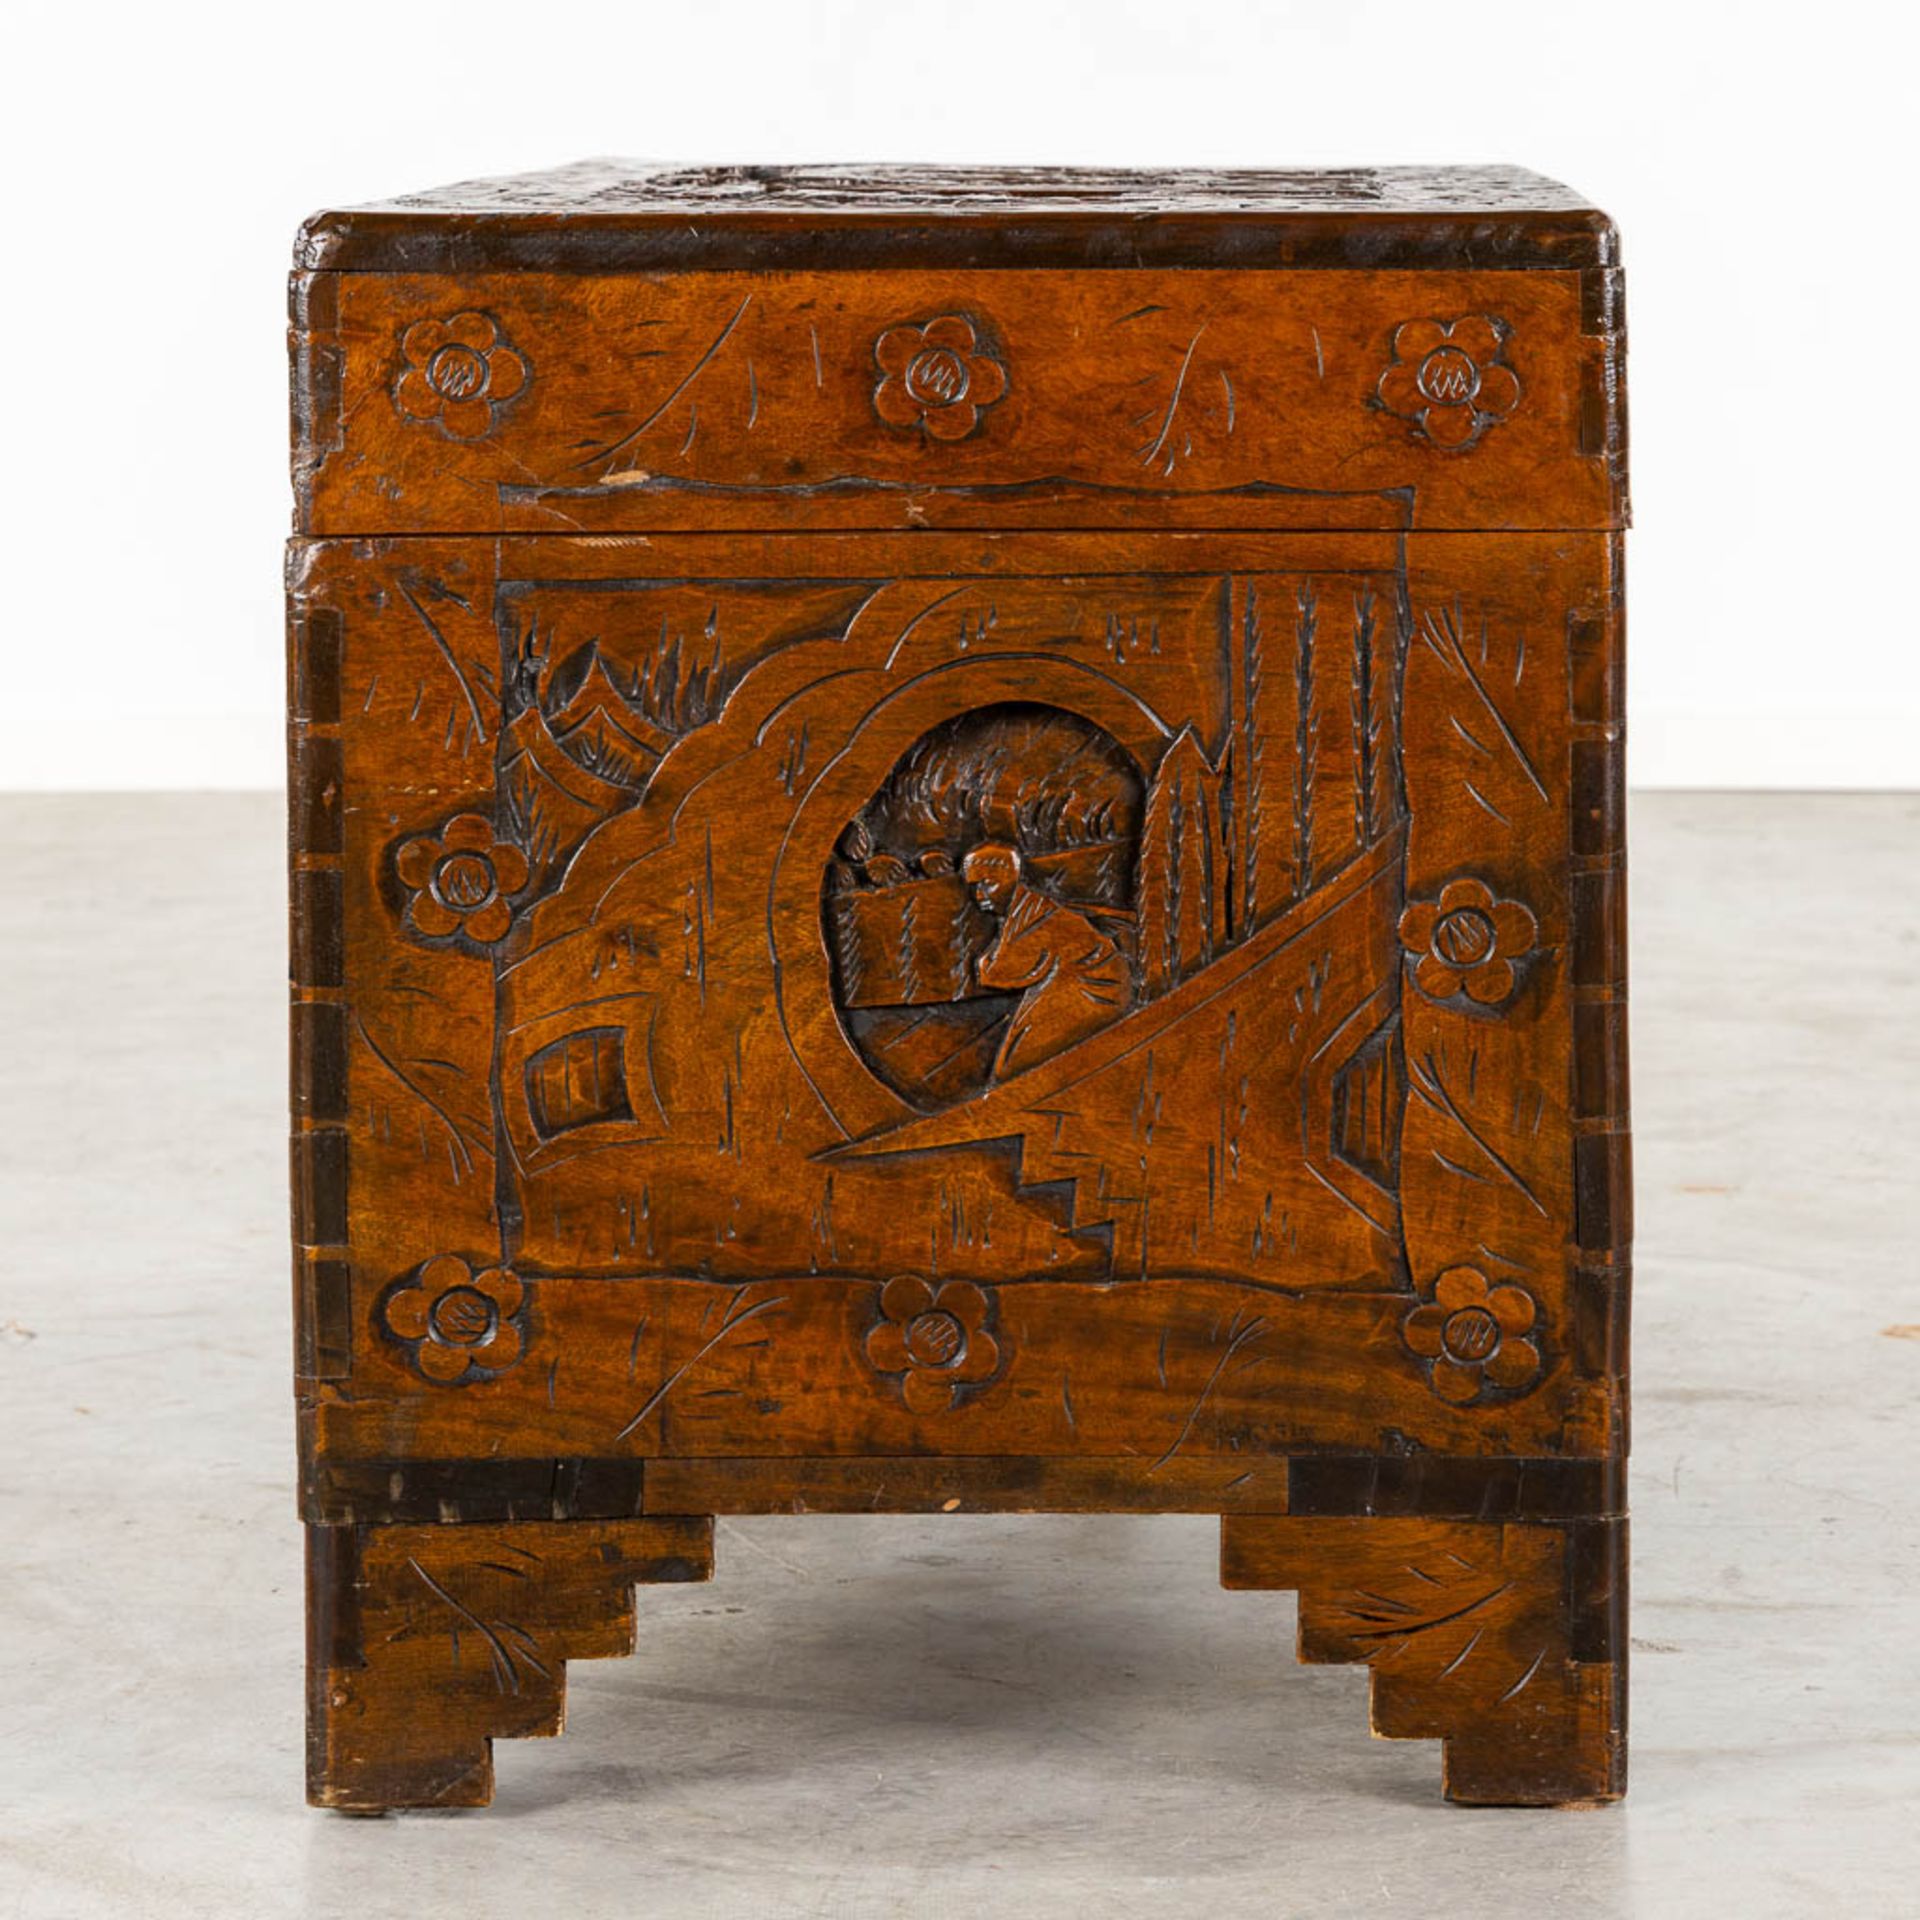 Two Oriental chests, tropical hardwood. Probably Myanmar. (L:50 x W:102 x H:60 cm) - Image 6 of 21